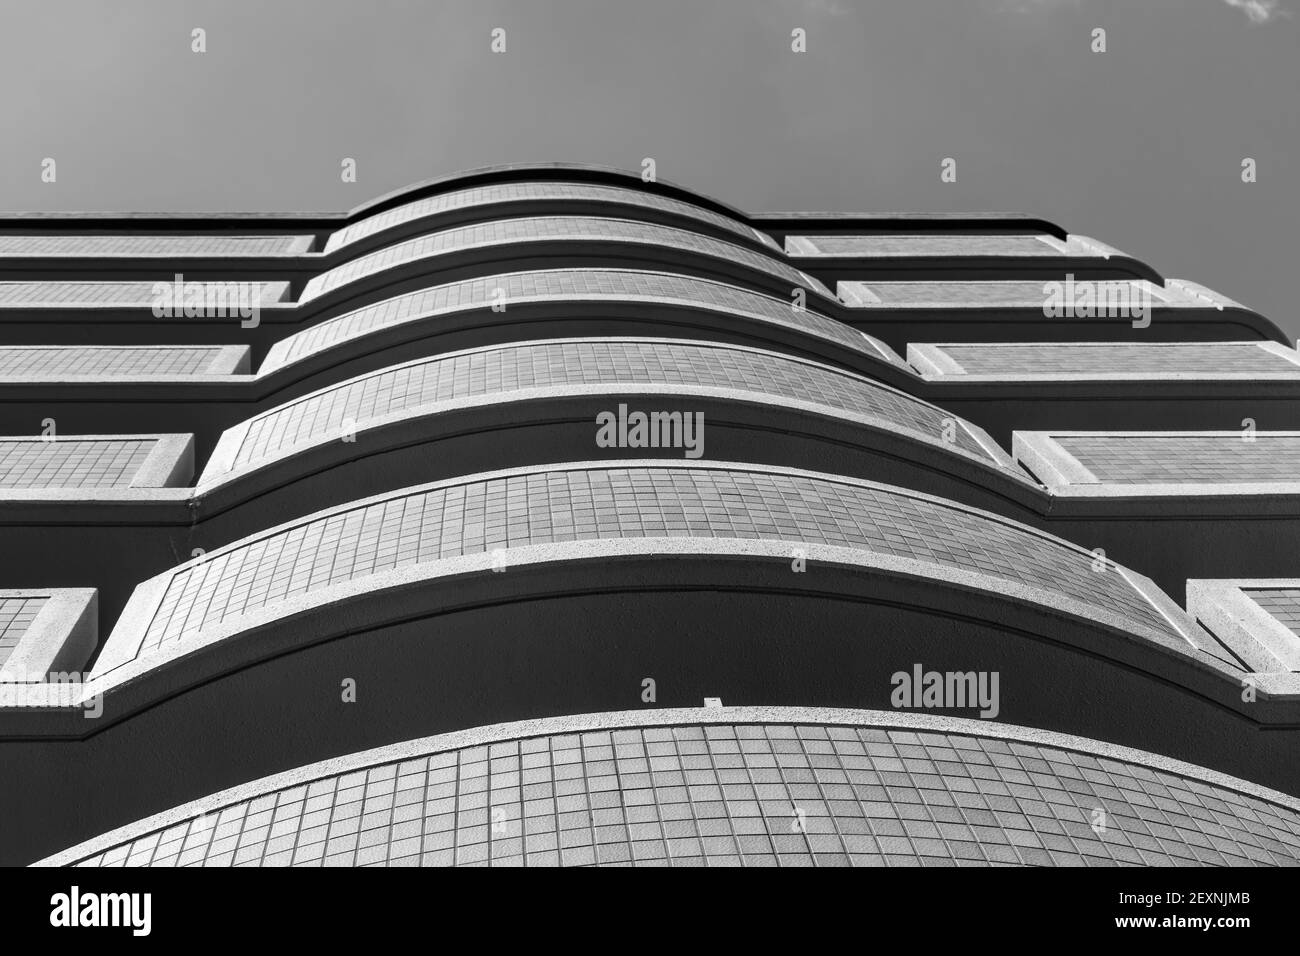 Rounded balconies of an apartment building create their own fish eye perspective. Stock Photo